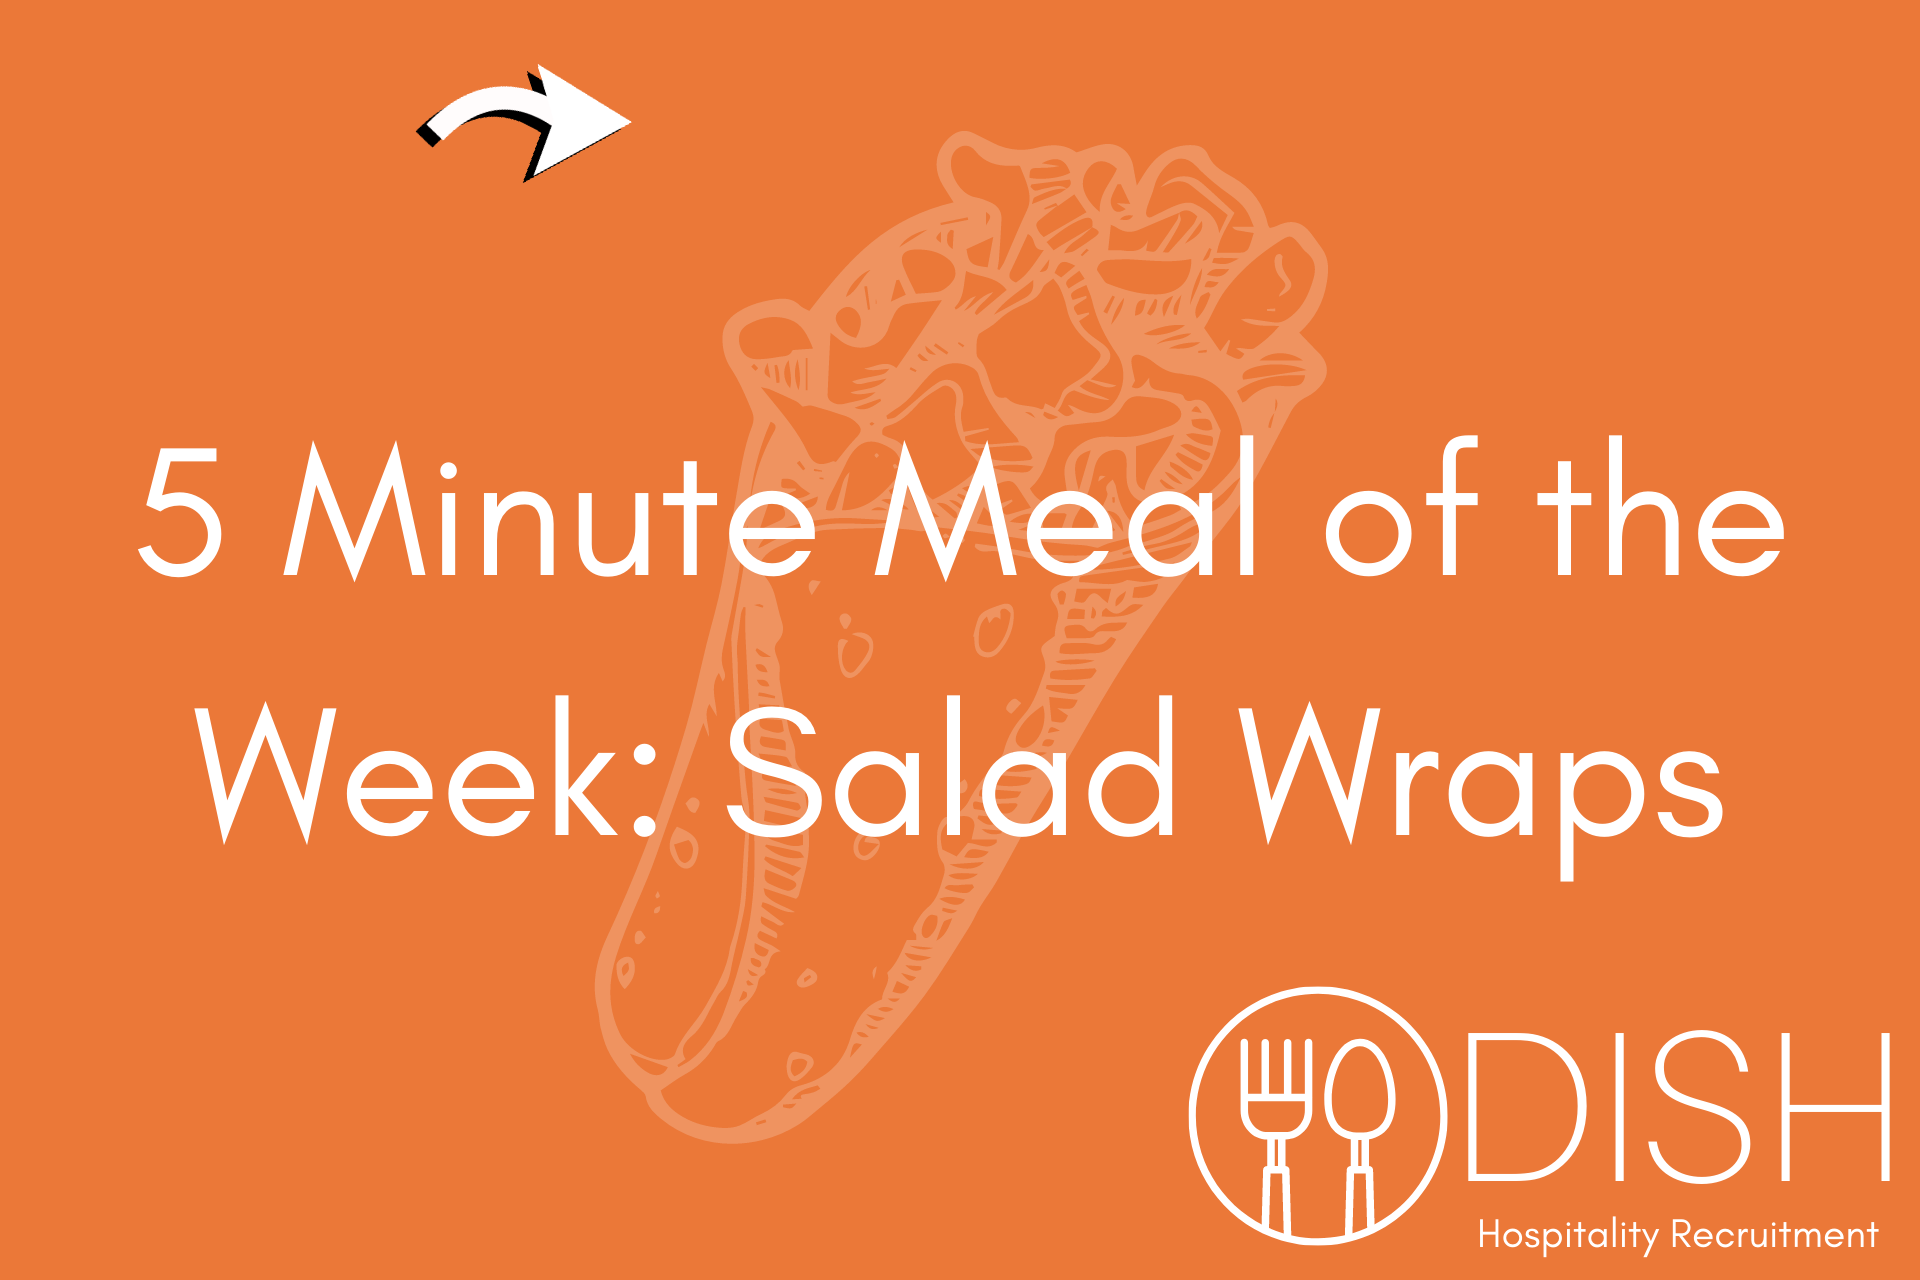 5 Minute Meal of the Week: Salad Wraps